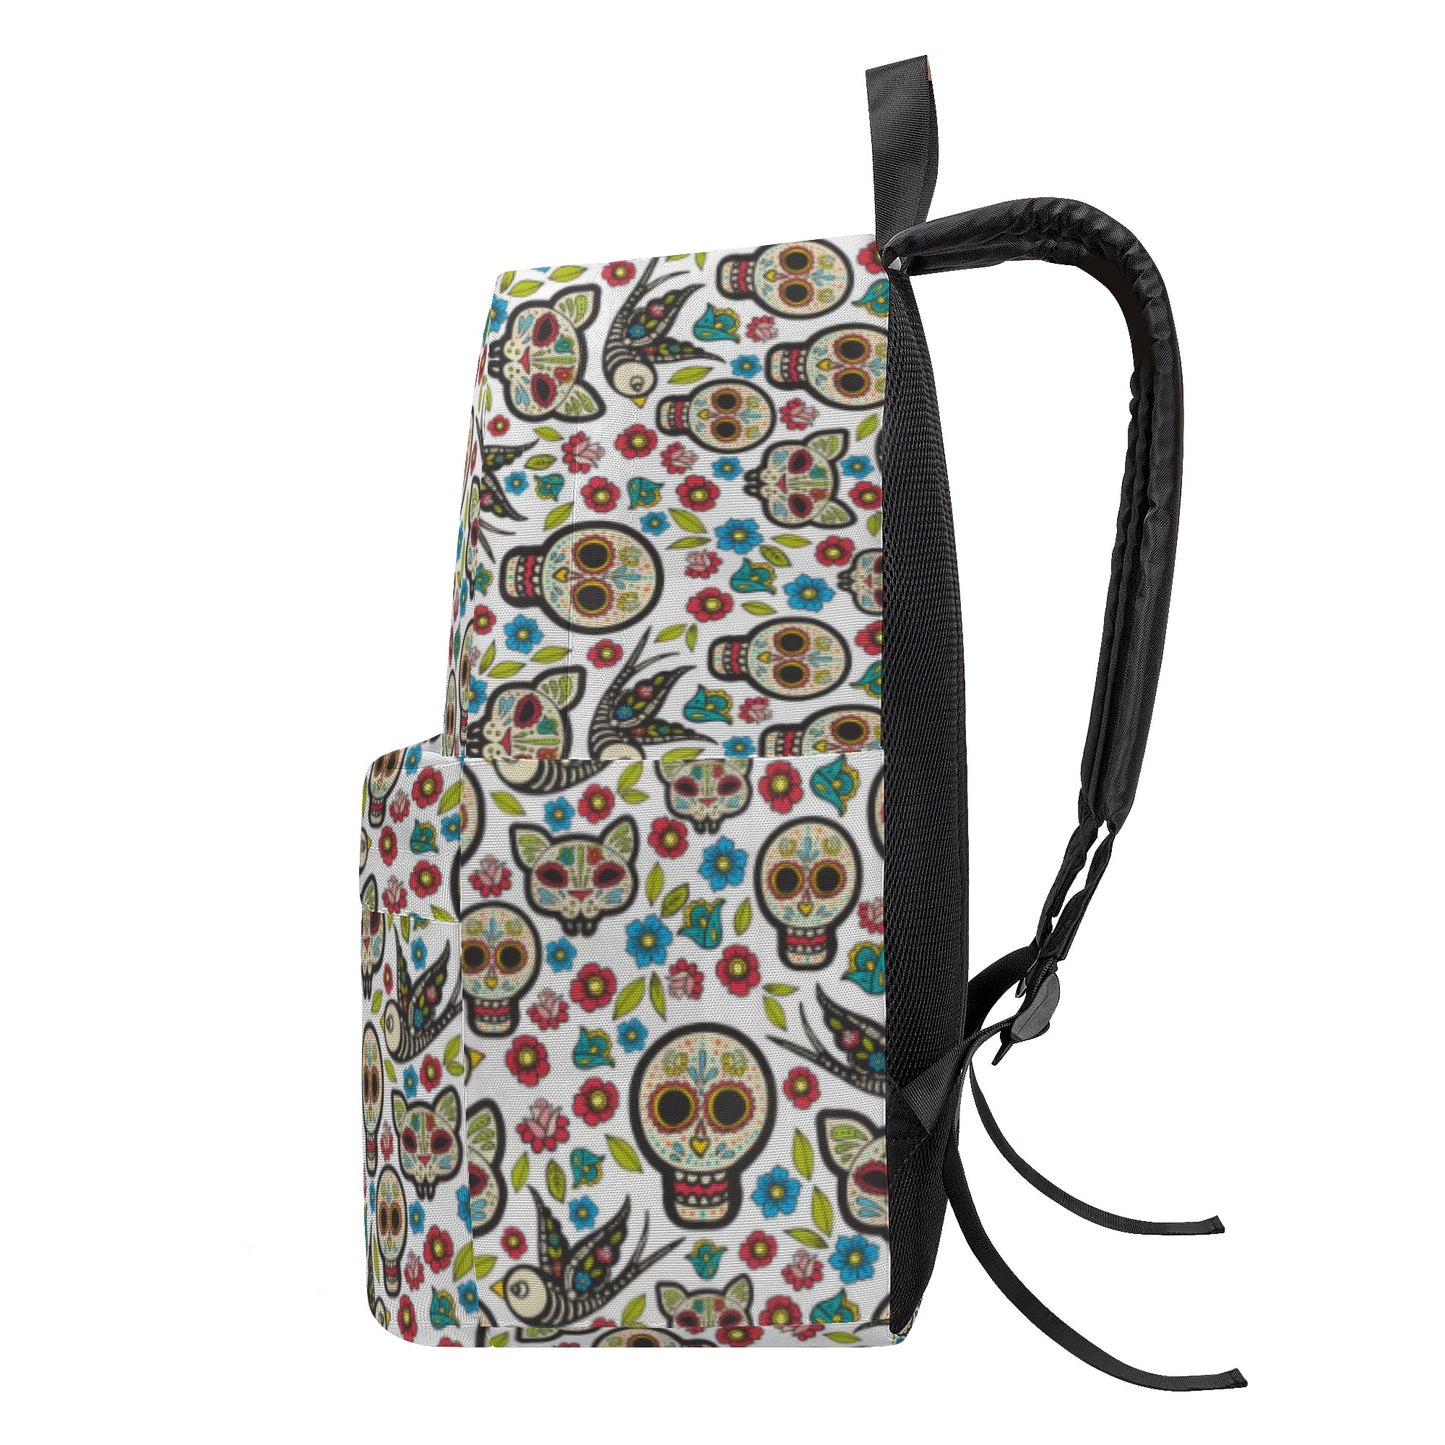 Day of the dead sugar skull gothic All Over Print Cotton Backpack